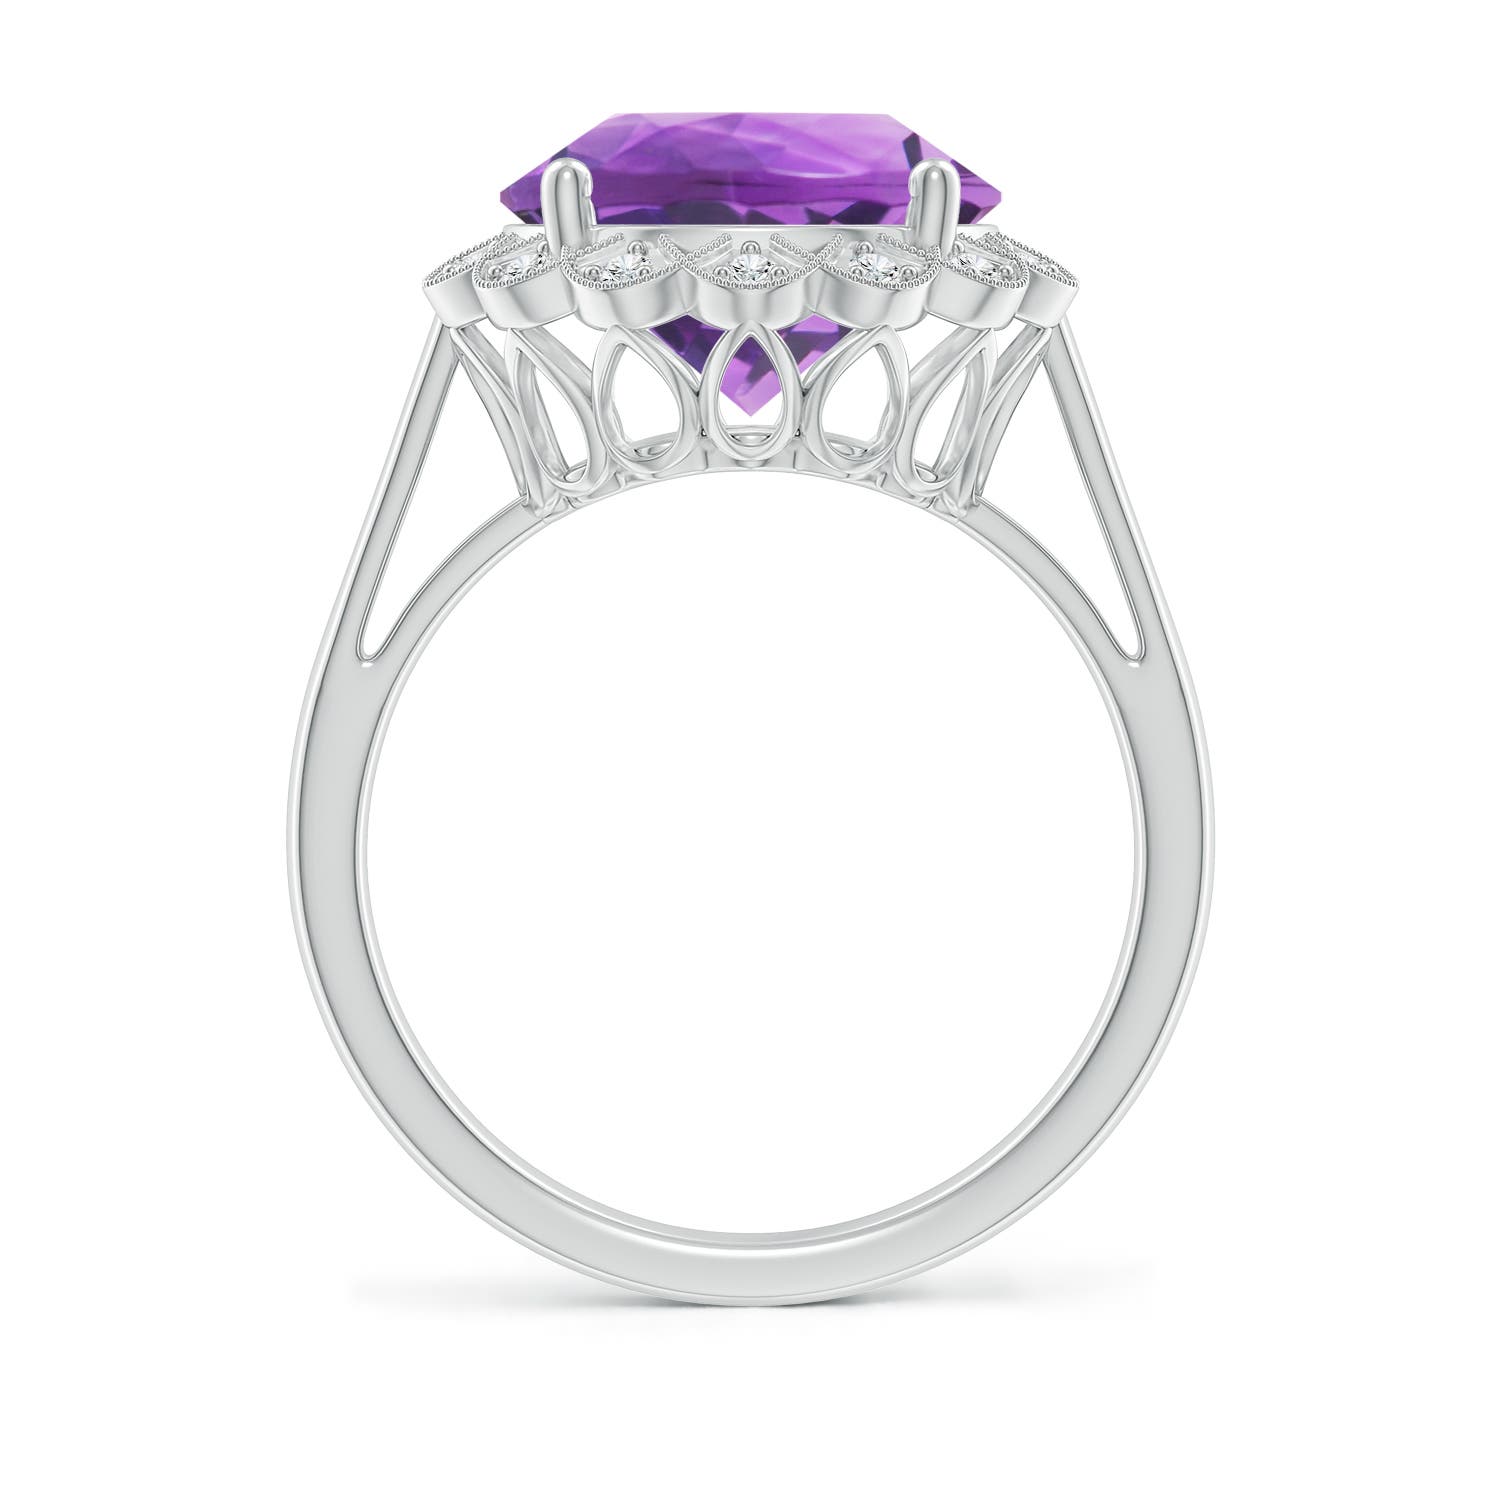 AA - Amethyst / 4.86 CT / 14 KT White Gold